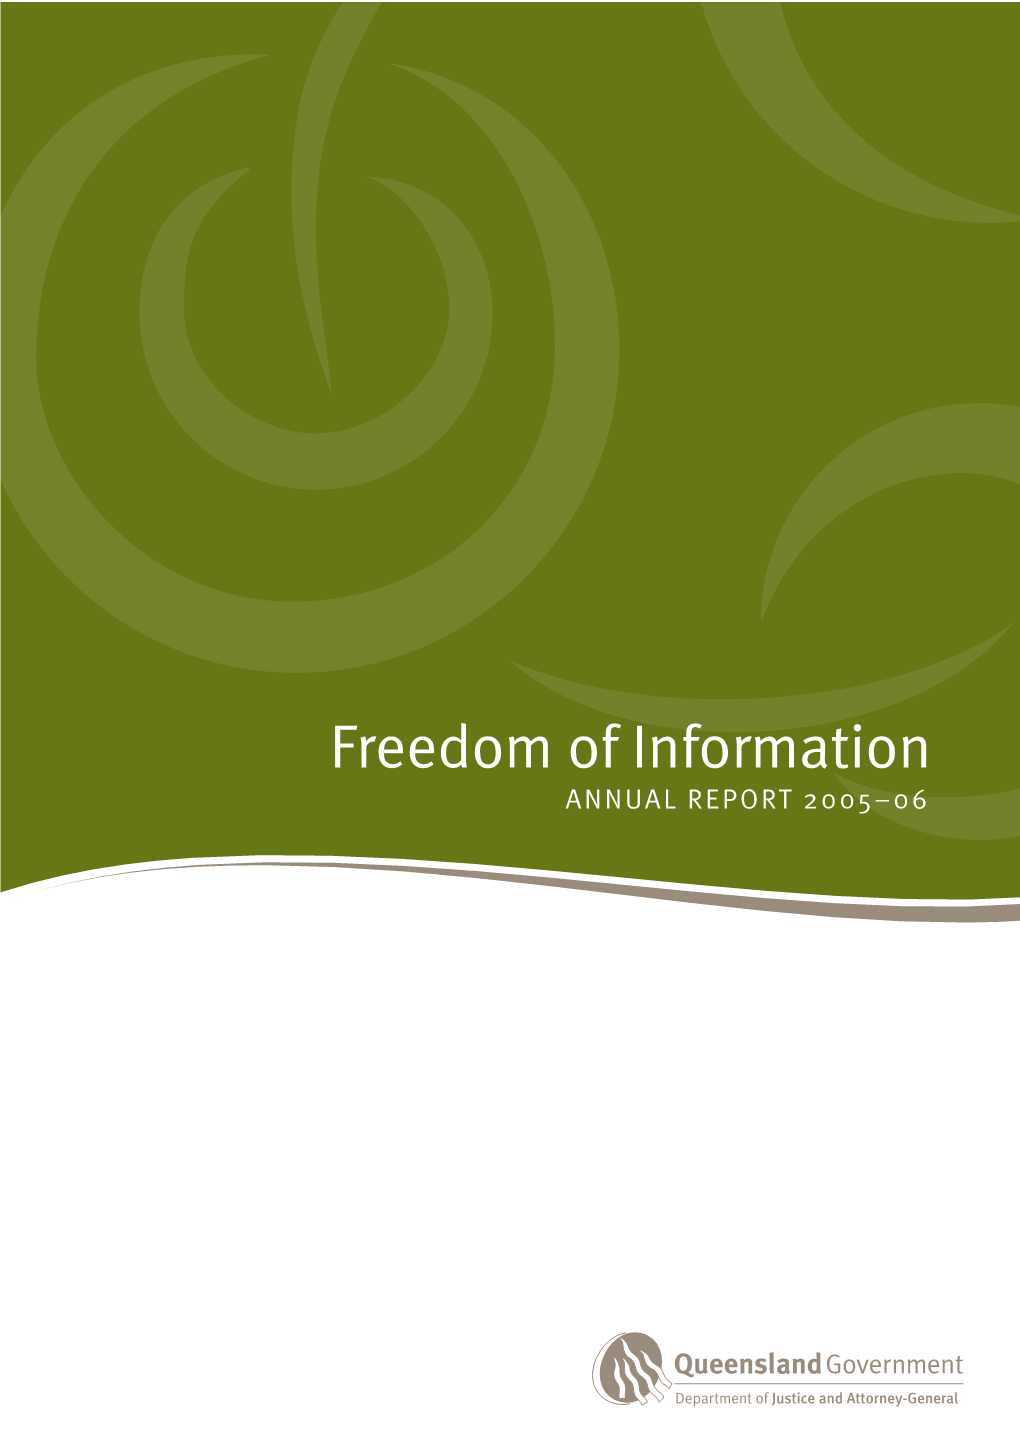 Freedom of Information 2005-06 Annual Report